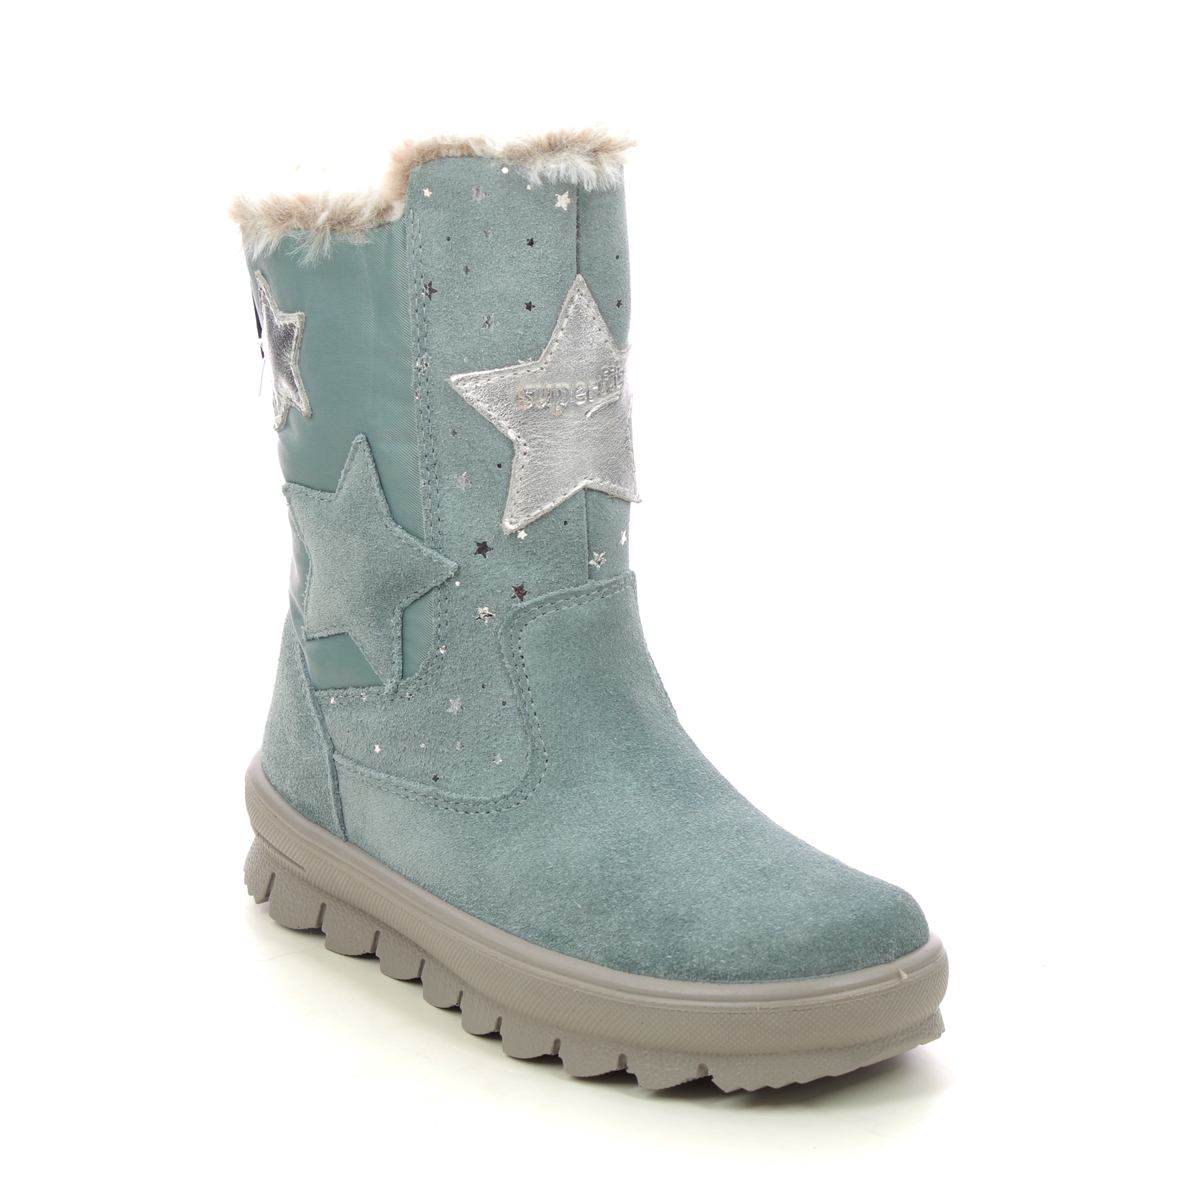 Superfit Flavia Star Gtx Blue Suede Kids Girls Boots 1000219-7500 In Size 31 In Plain Blue Suede For kids